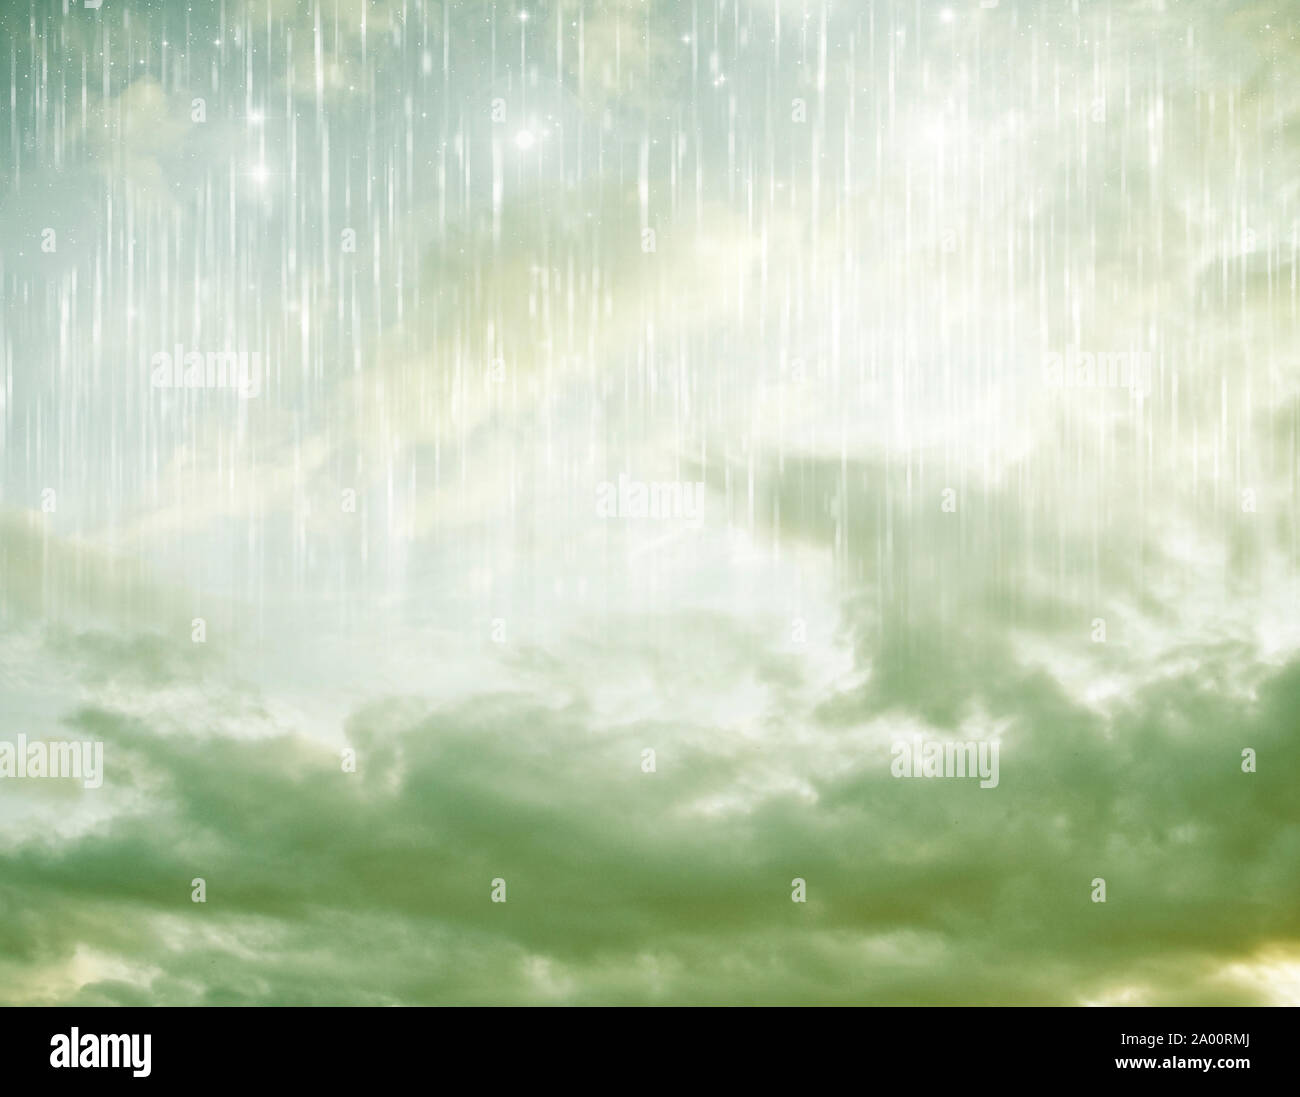 abstract background of clouds and rain Stock Photo